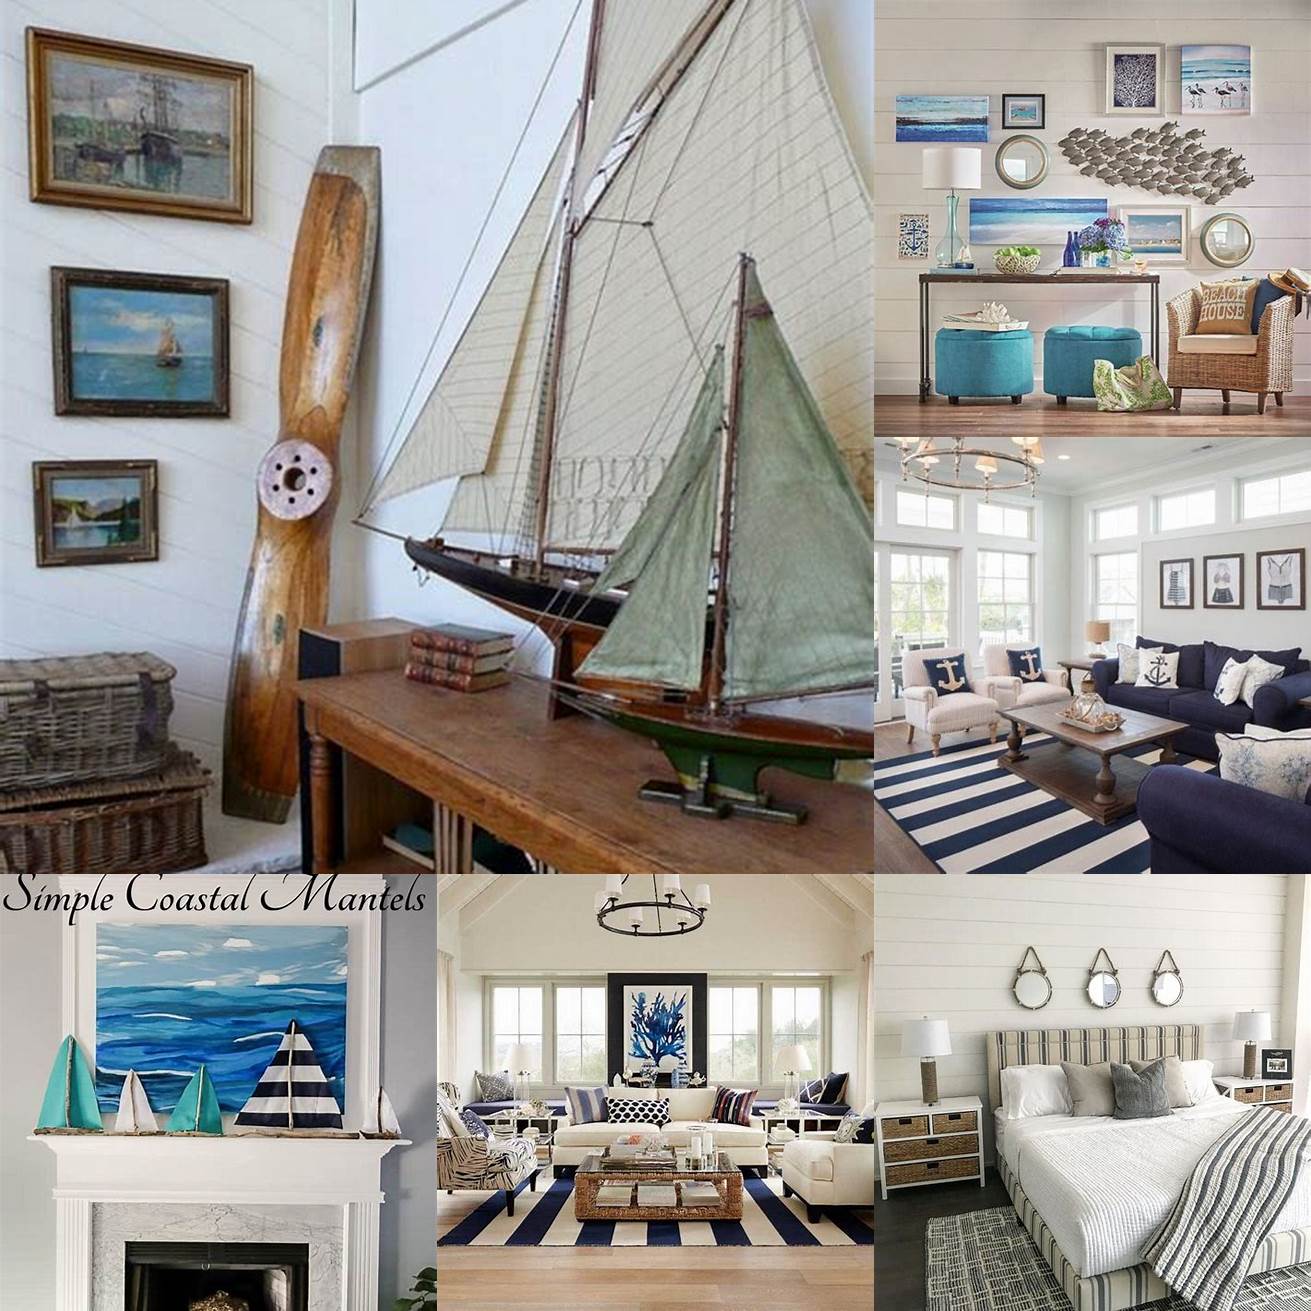 Nautical decor can be expensive especially if you opt for high-end materials like teak or brass